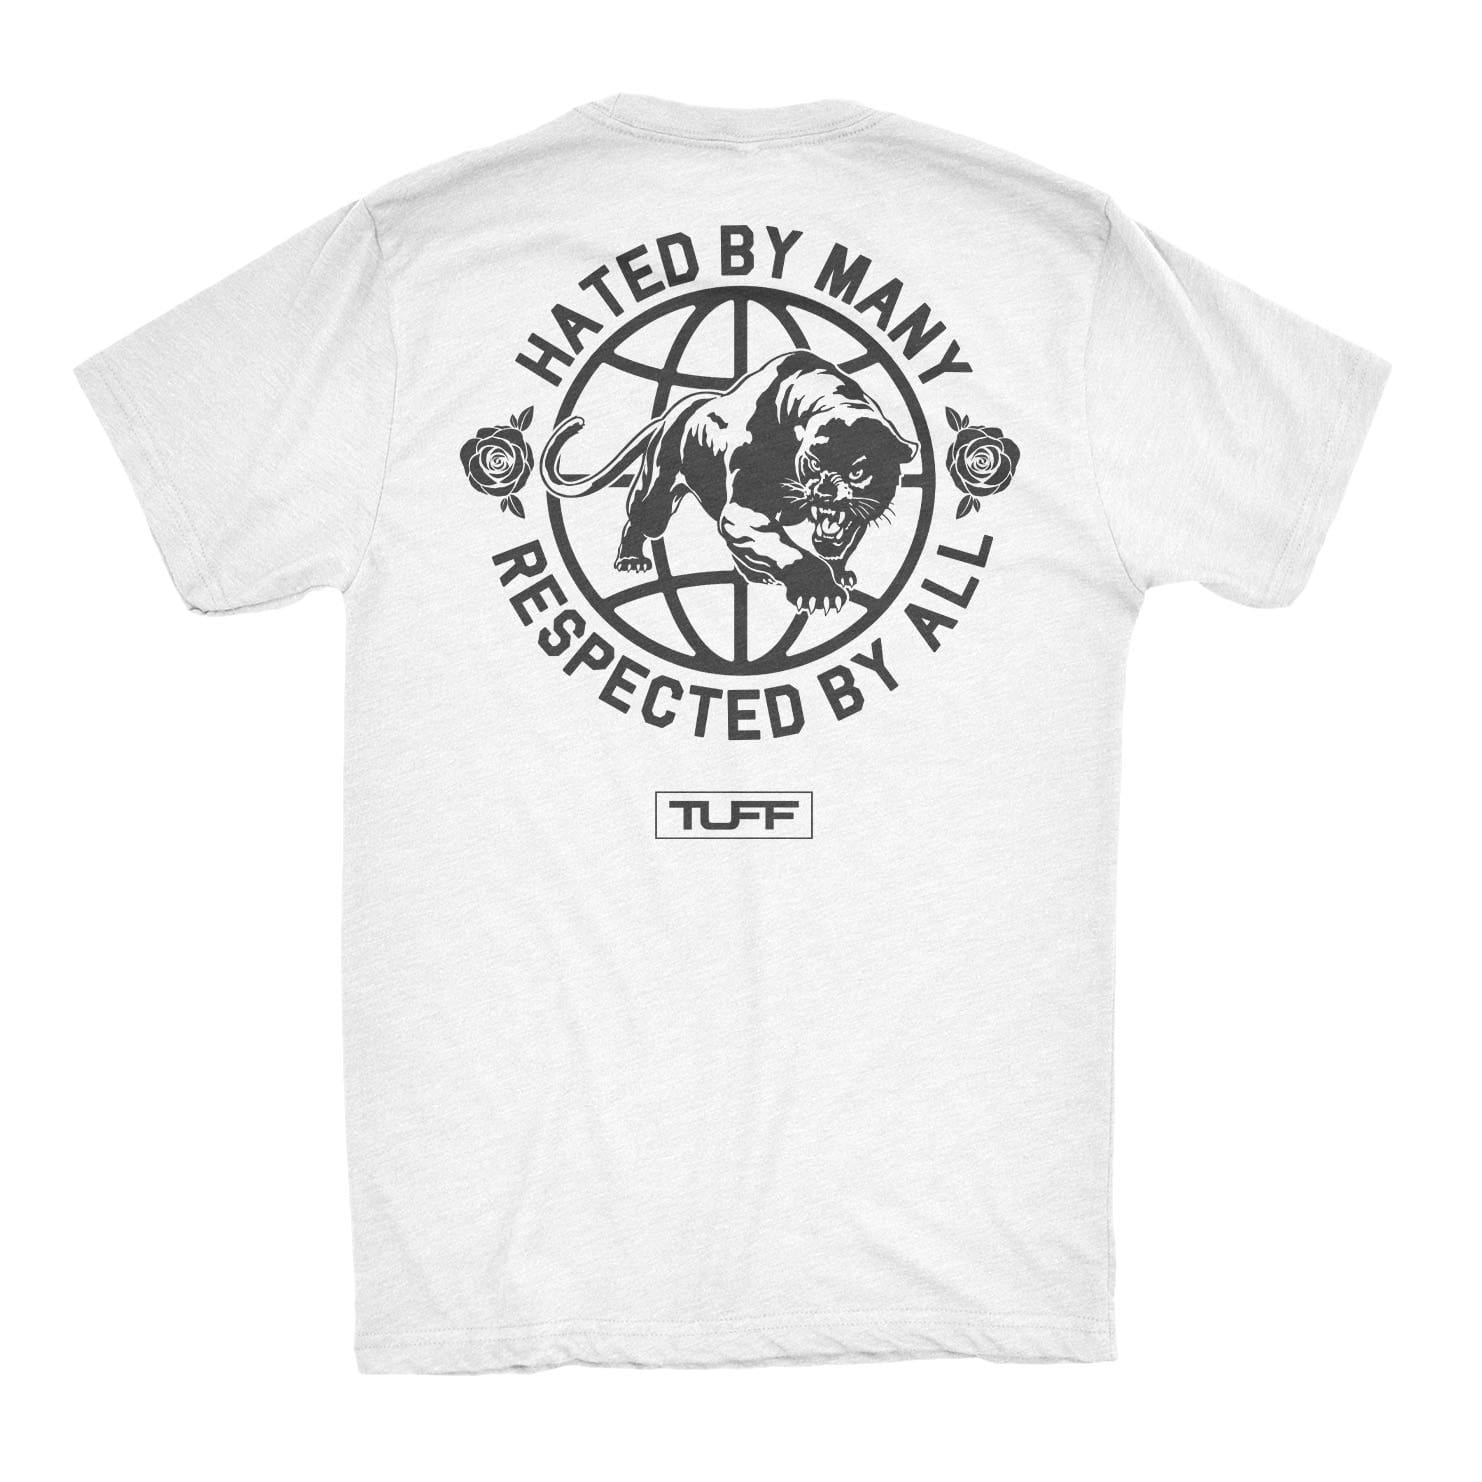 Hated By Many, Respected By All Tee T-shirt